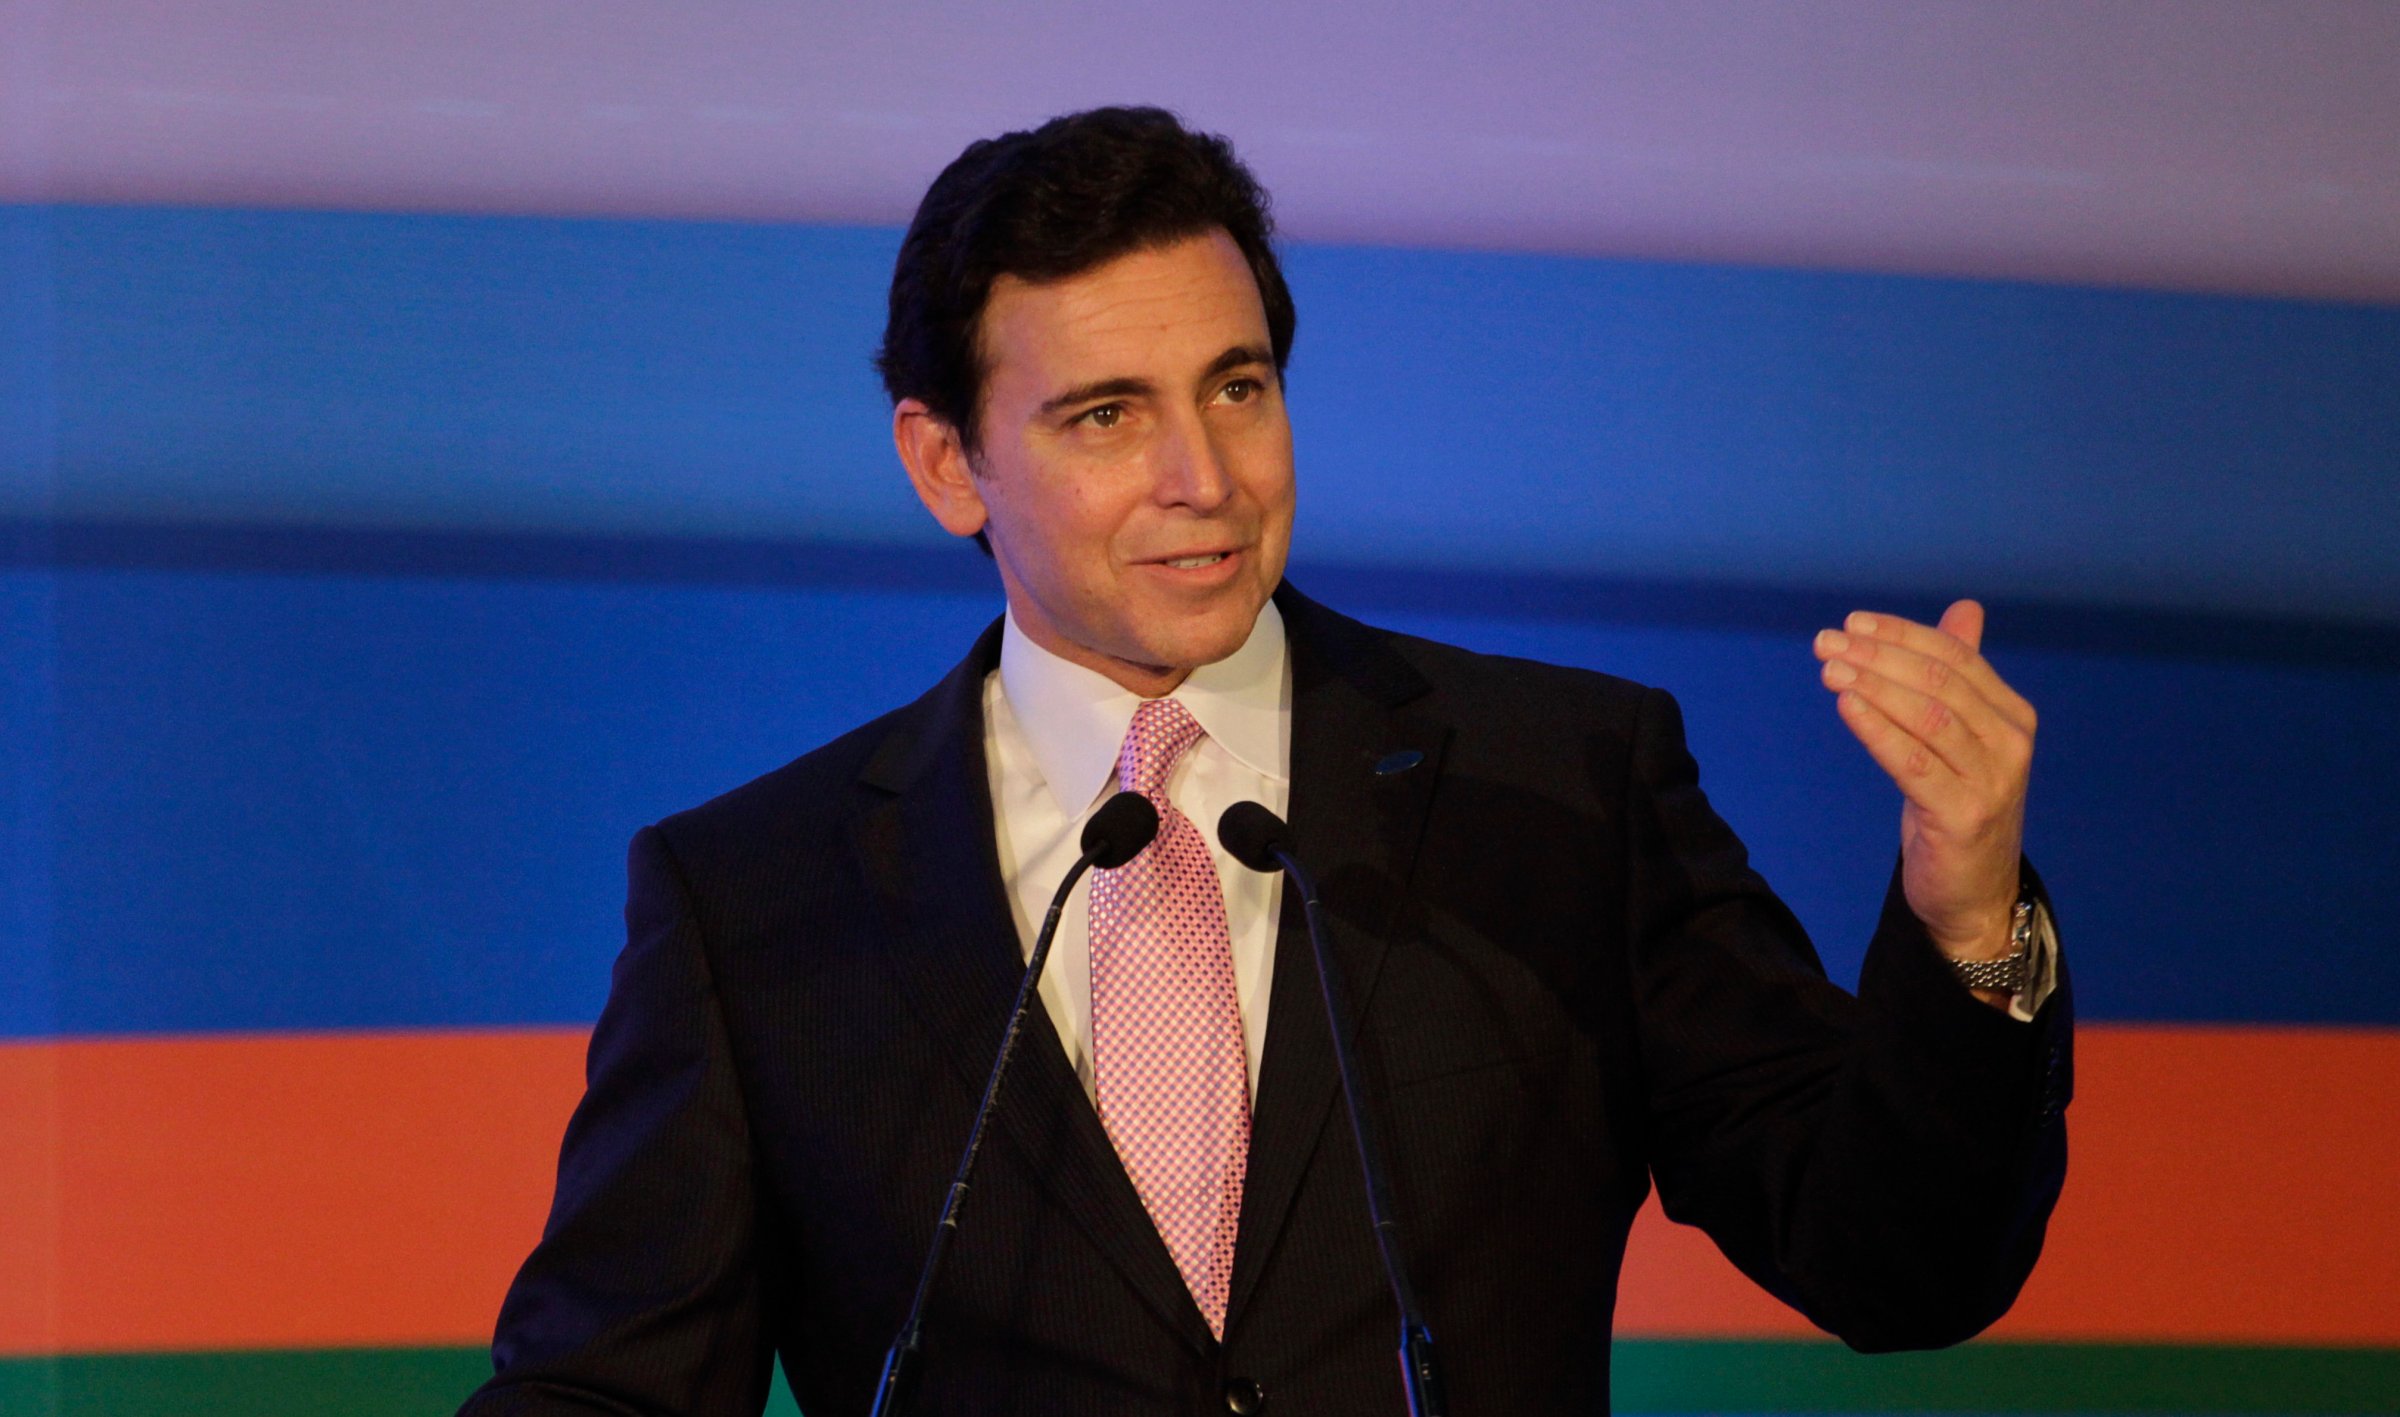 Ford President and CEO Mark Fields speaks at Ford's manufacturing facility and engineering plant in Sanand, India on March 26, 2015.